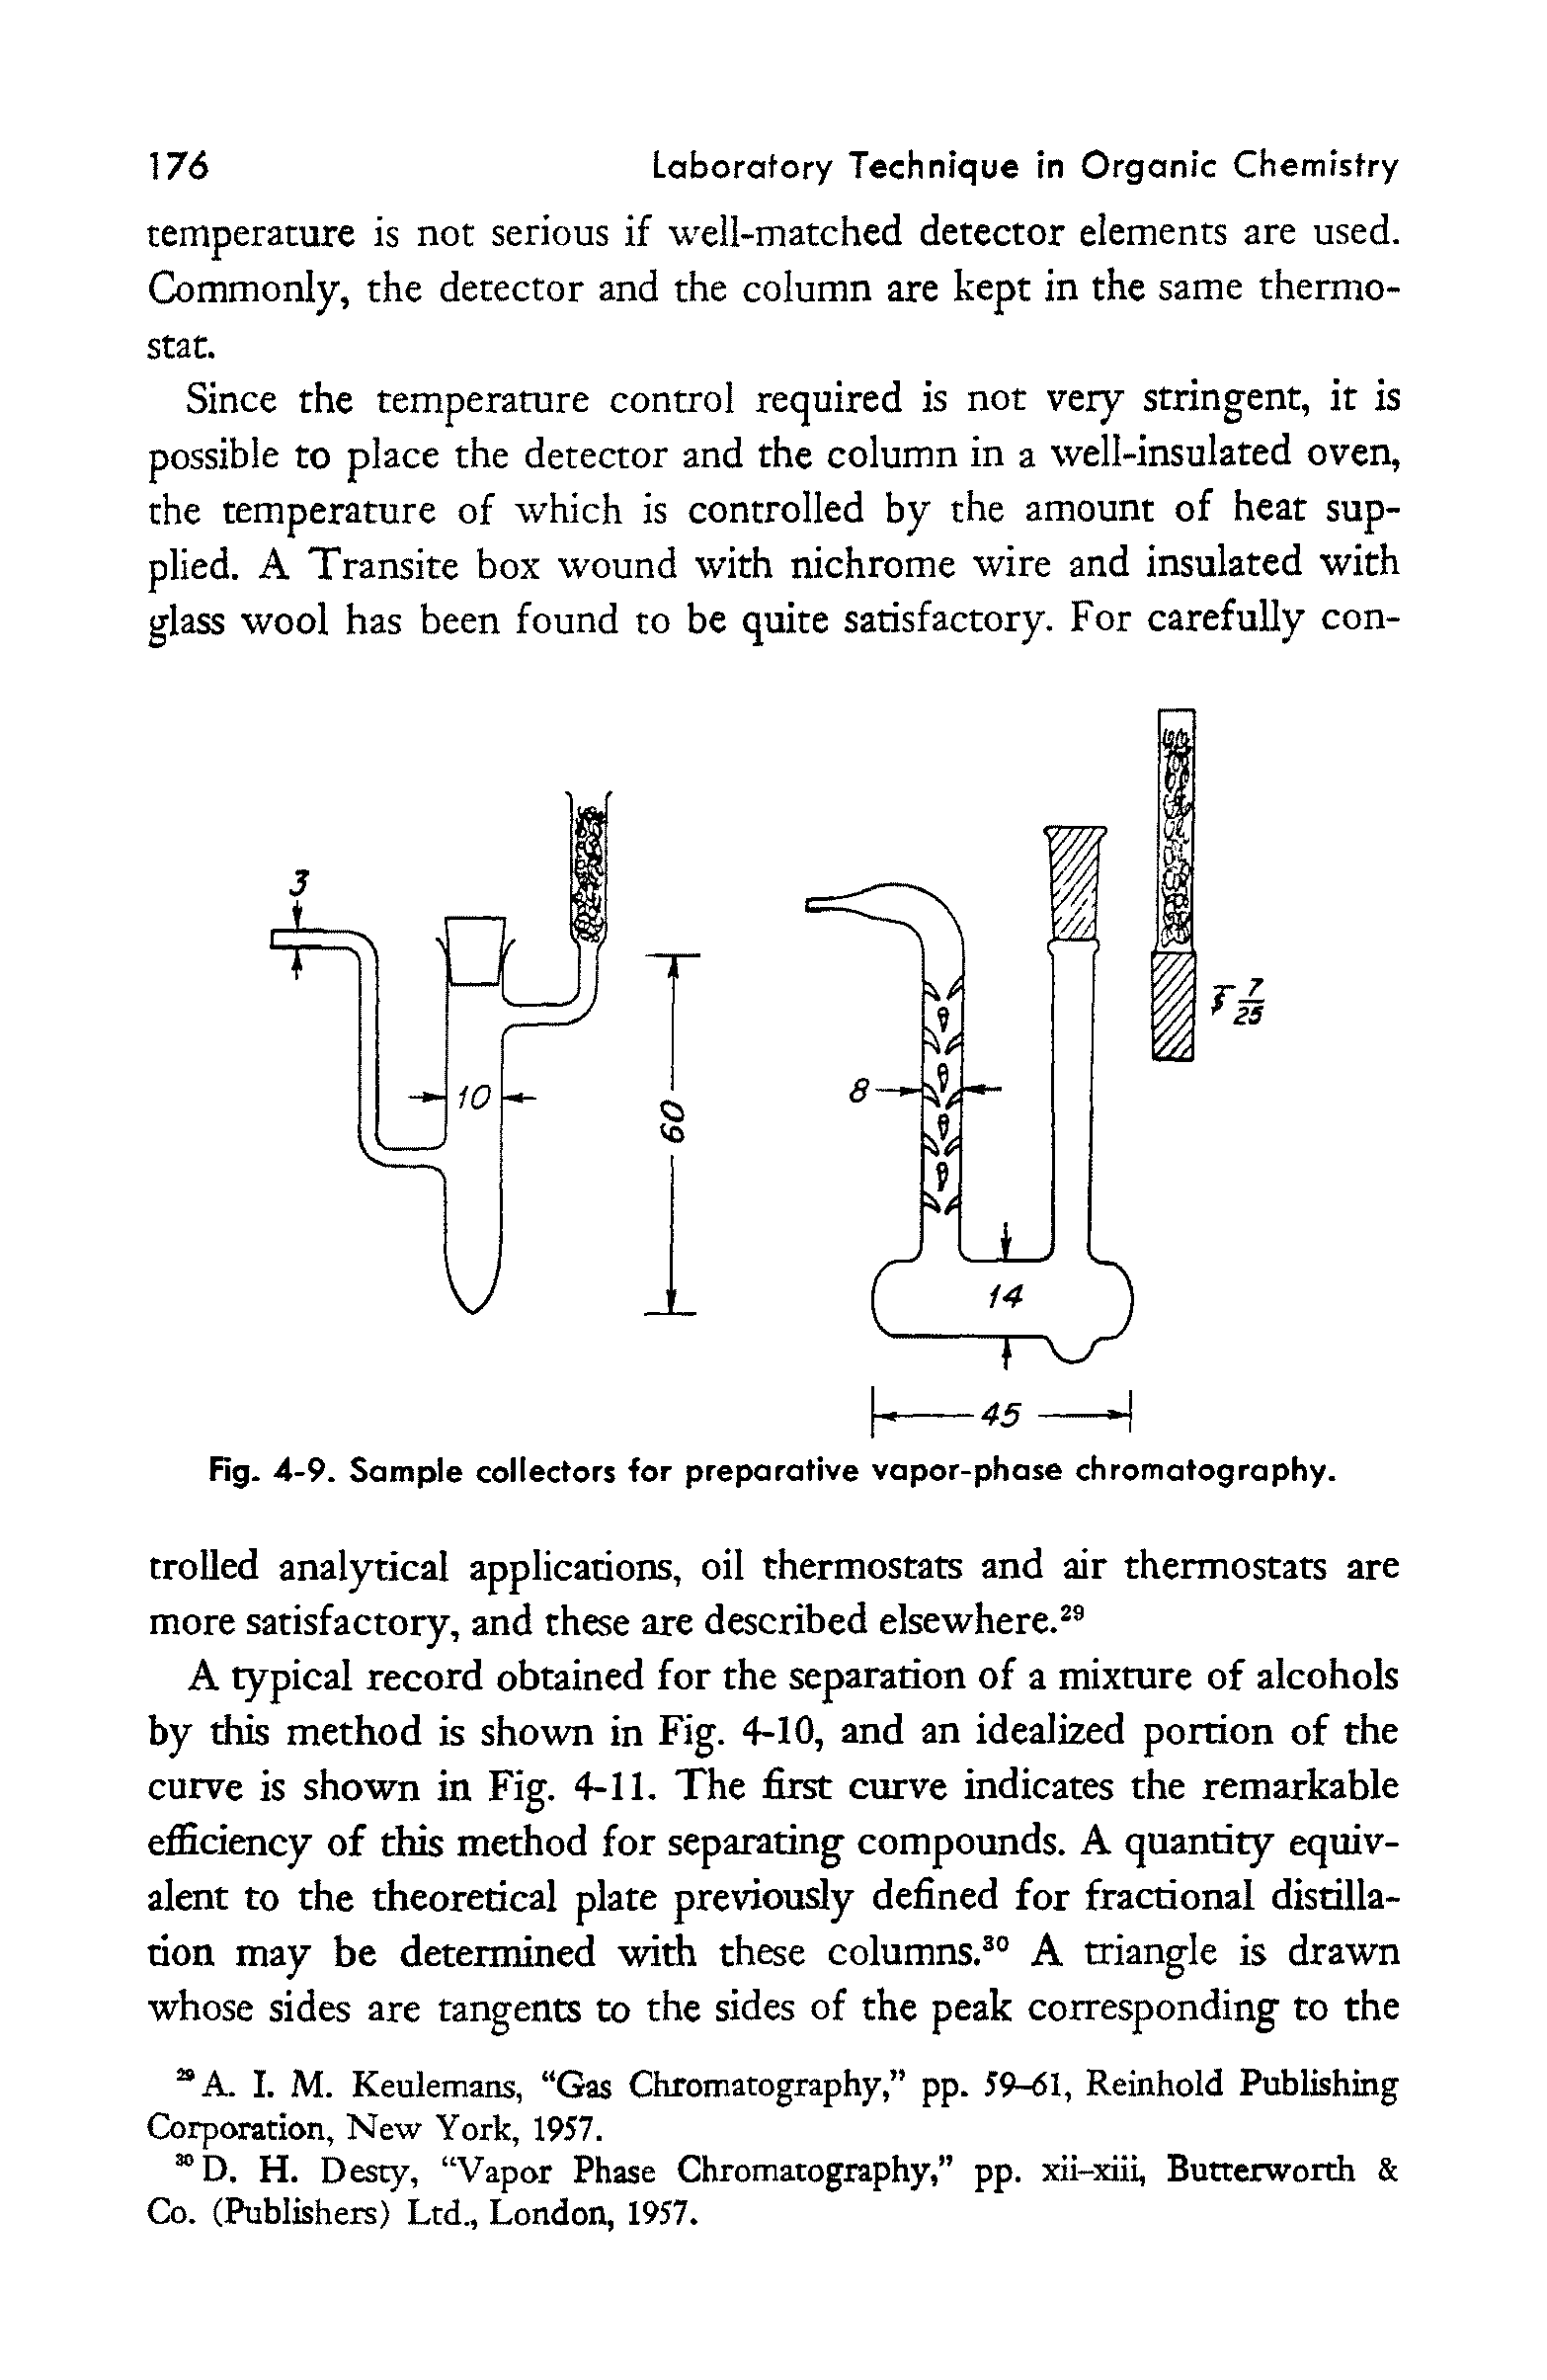 Fig. 4-9. Sample collectors for preparative vapor-phase chromatography.